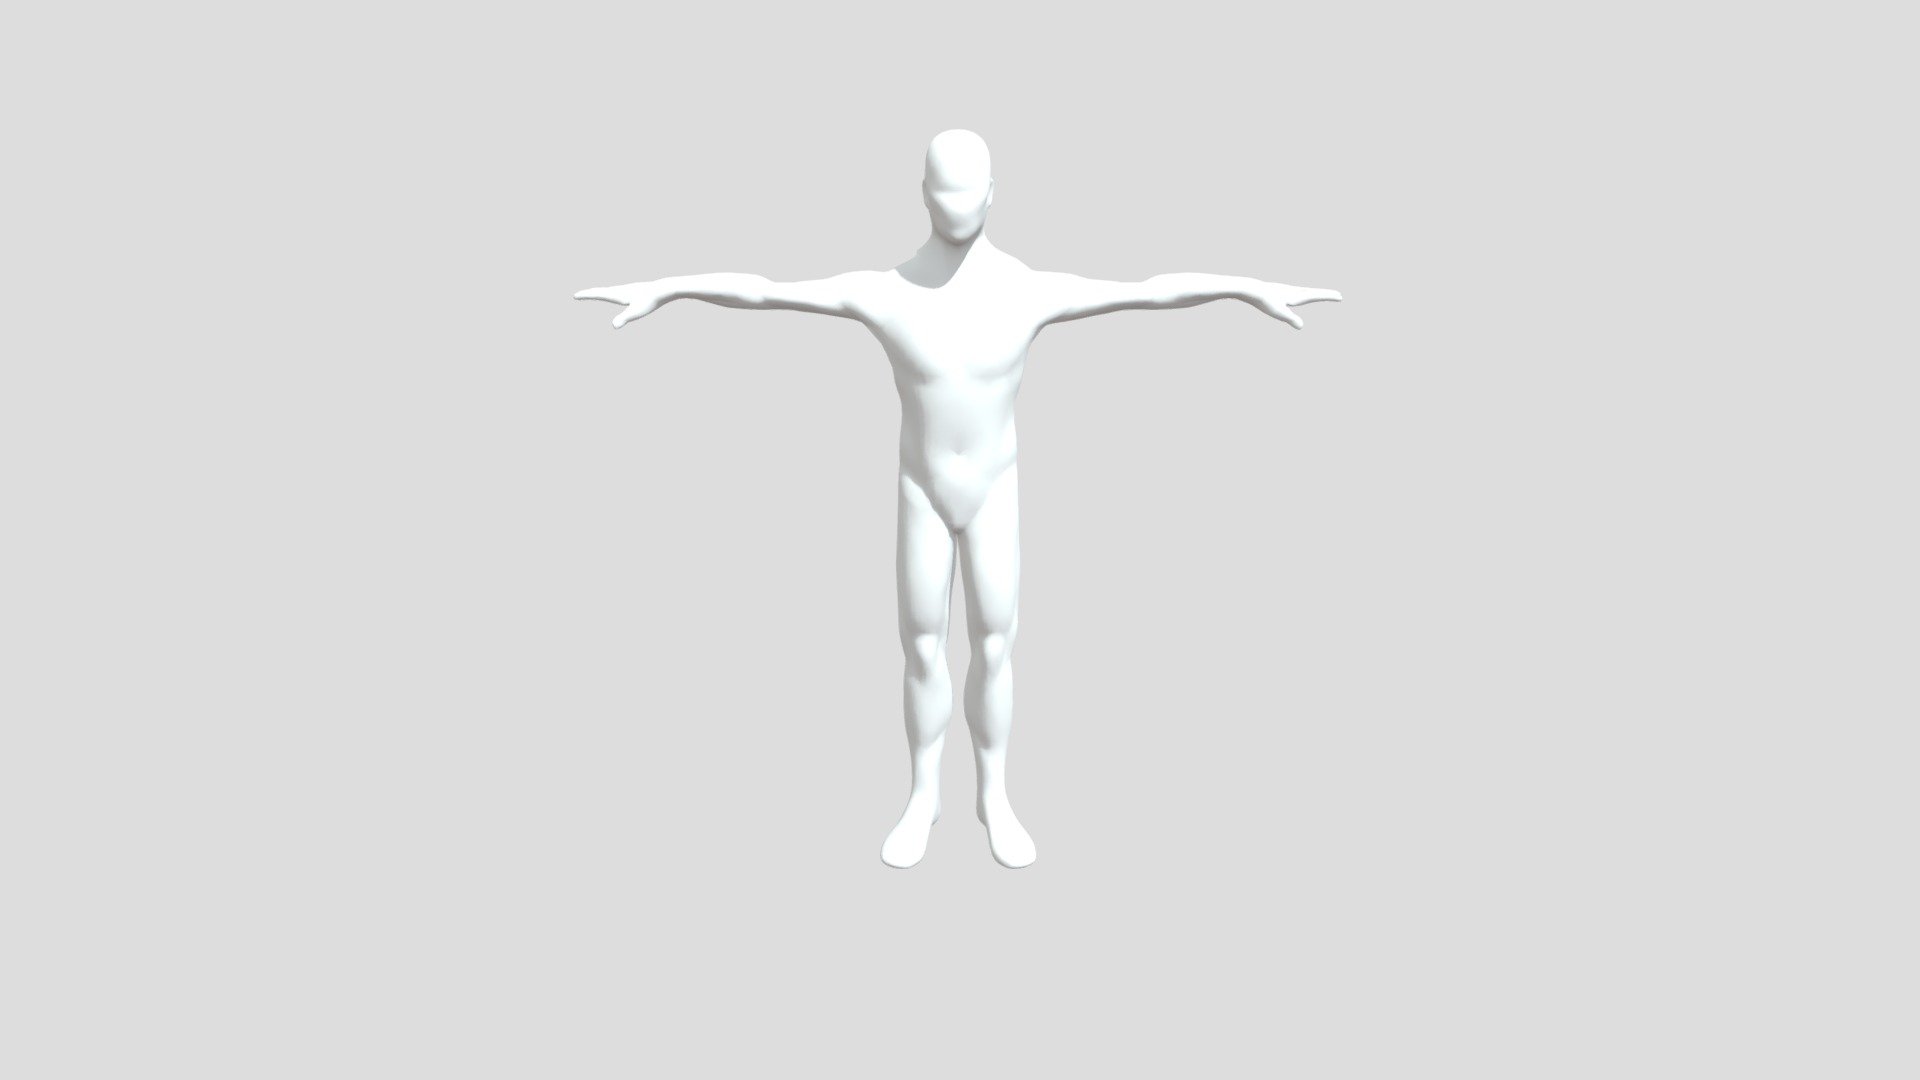 Base Mesh .fbx file **** available for IMPORT into  any software  - 
WARNING: MUST FIRST SCALE UP!
https://pasteboard.co/K6M1blLvFqwH.png - Base Mesh T Pose FBX - Download Free 3D model by nuffylabz 3d model